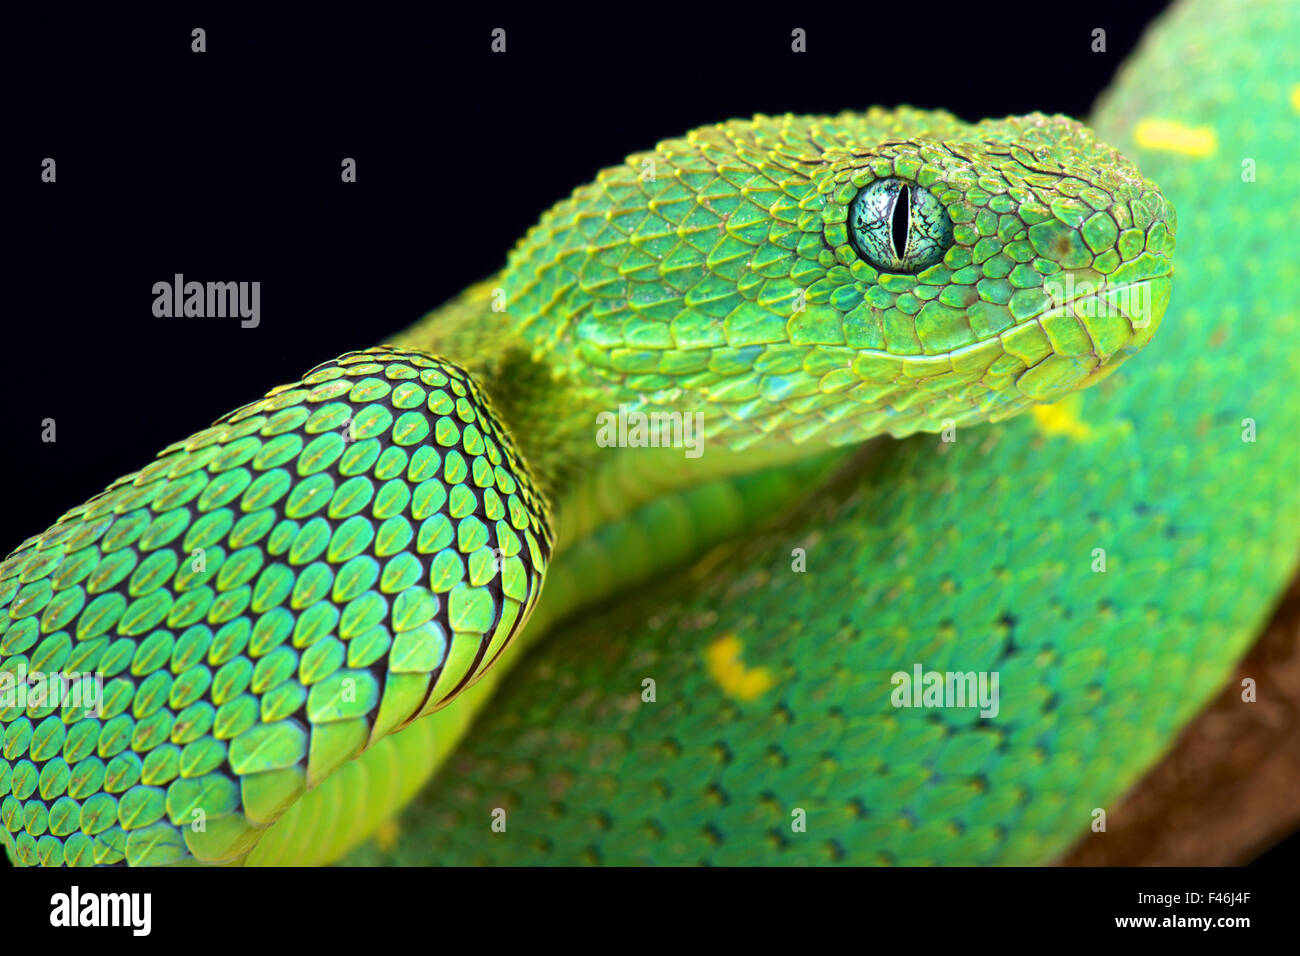 African Bush Viper stock photo - Minden Pictures